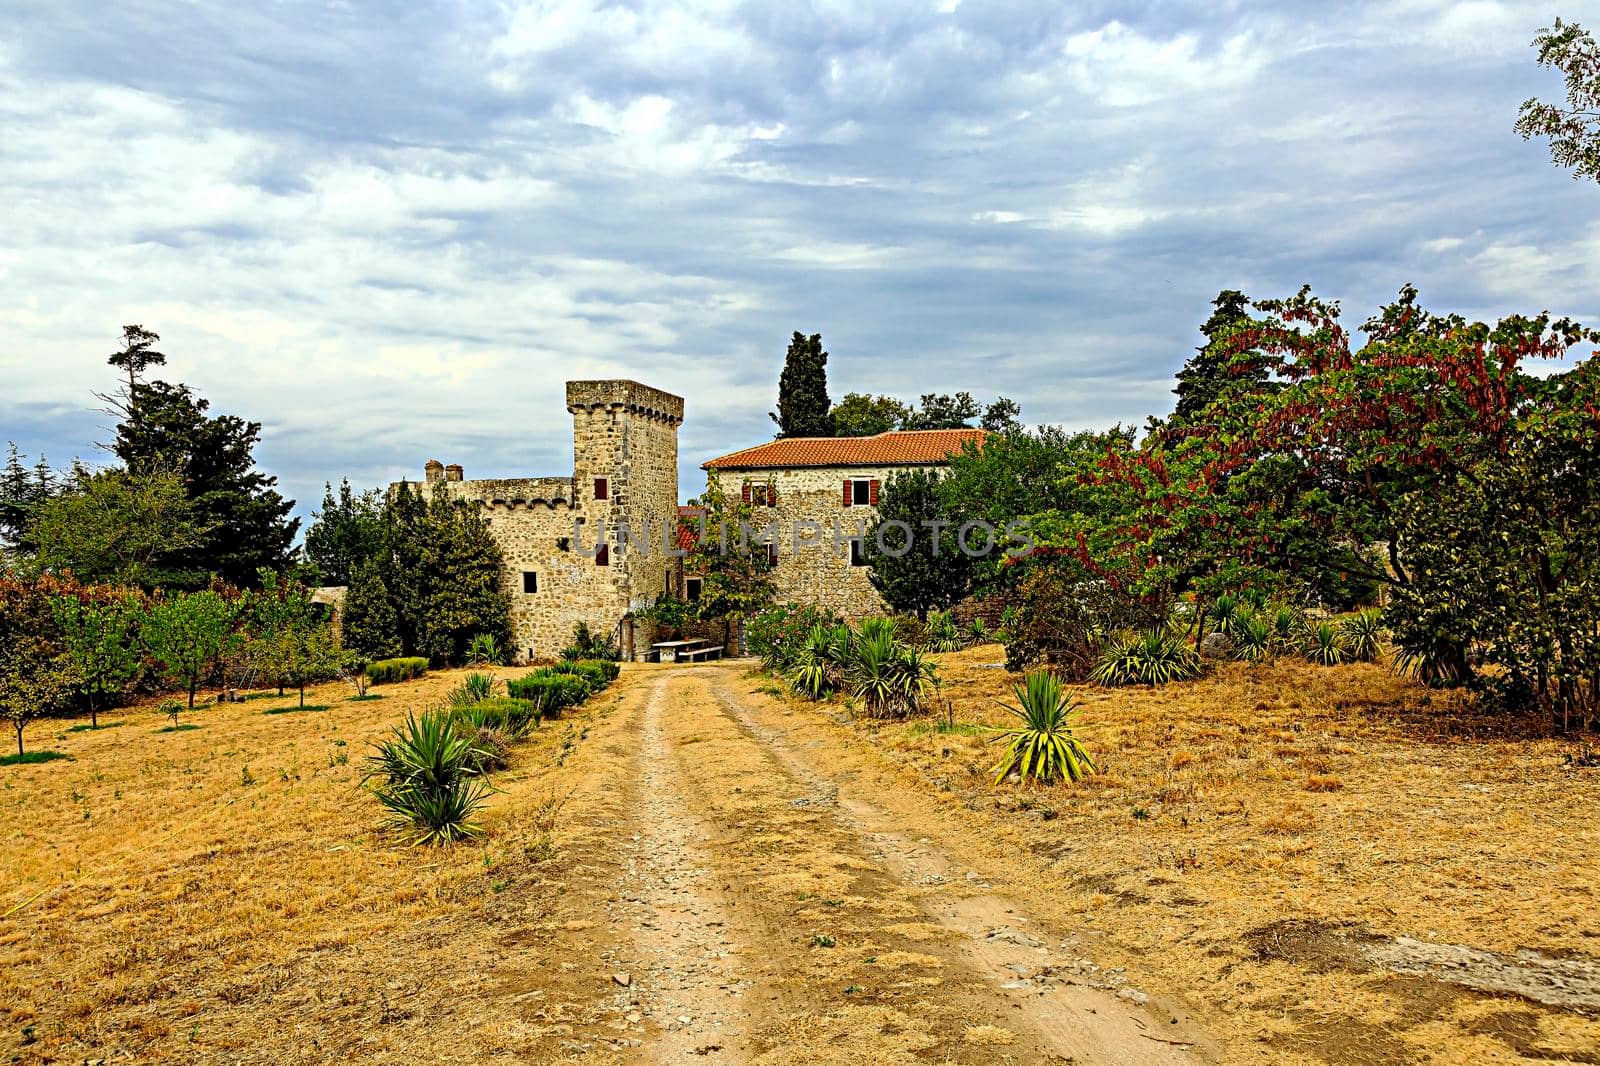 old castle in the mountains, Croatia by seka33